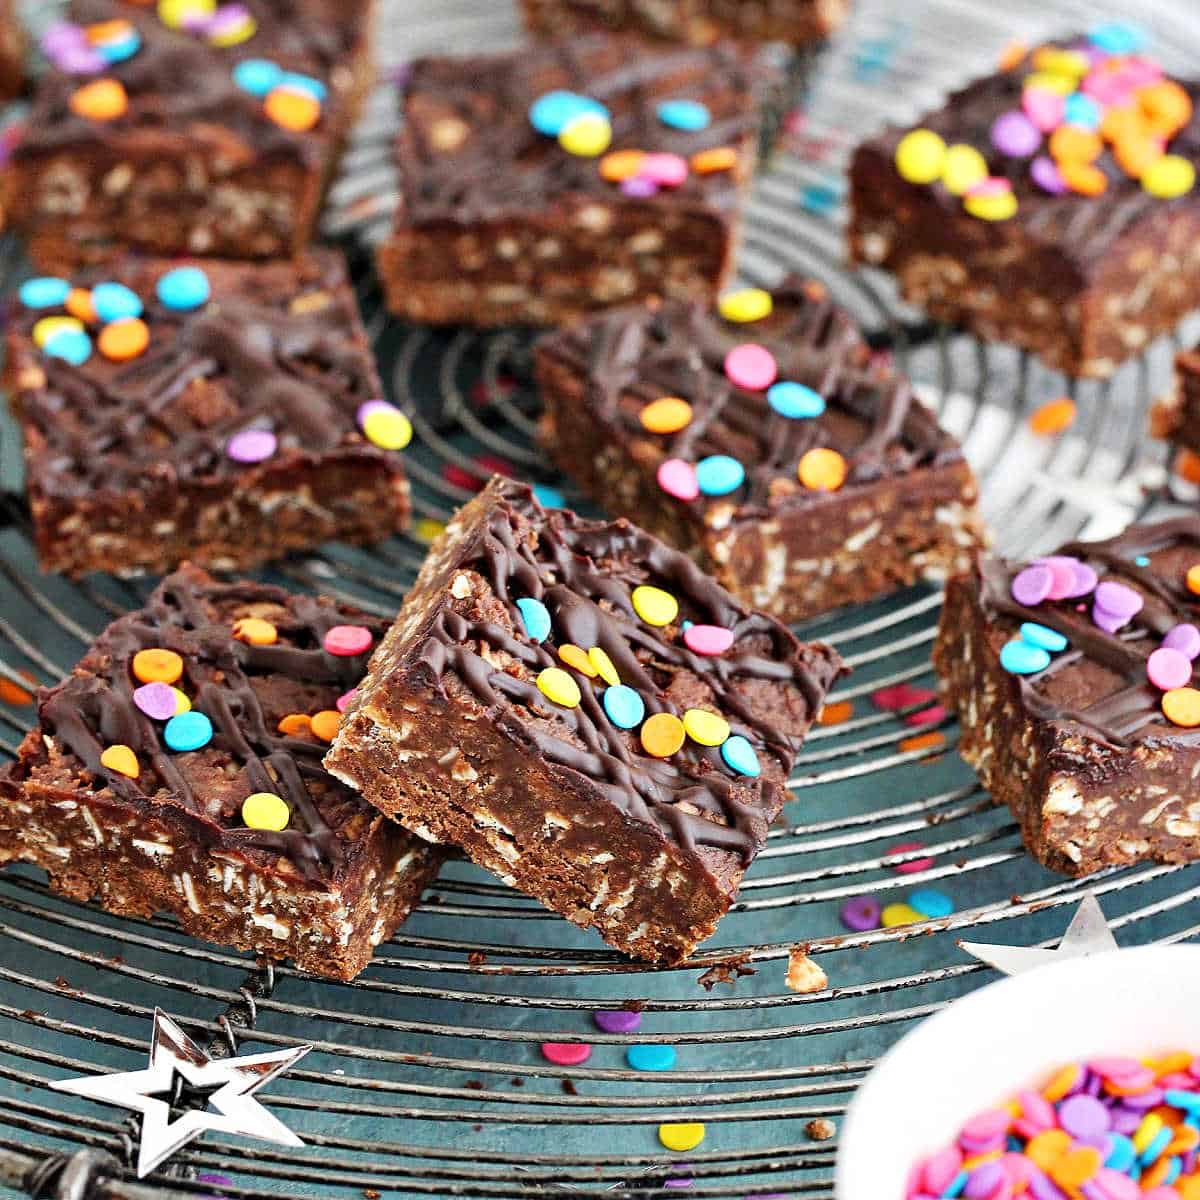 Pile of chocolate oat bars with confetti on a wire rack set on a blue surface. 